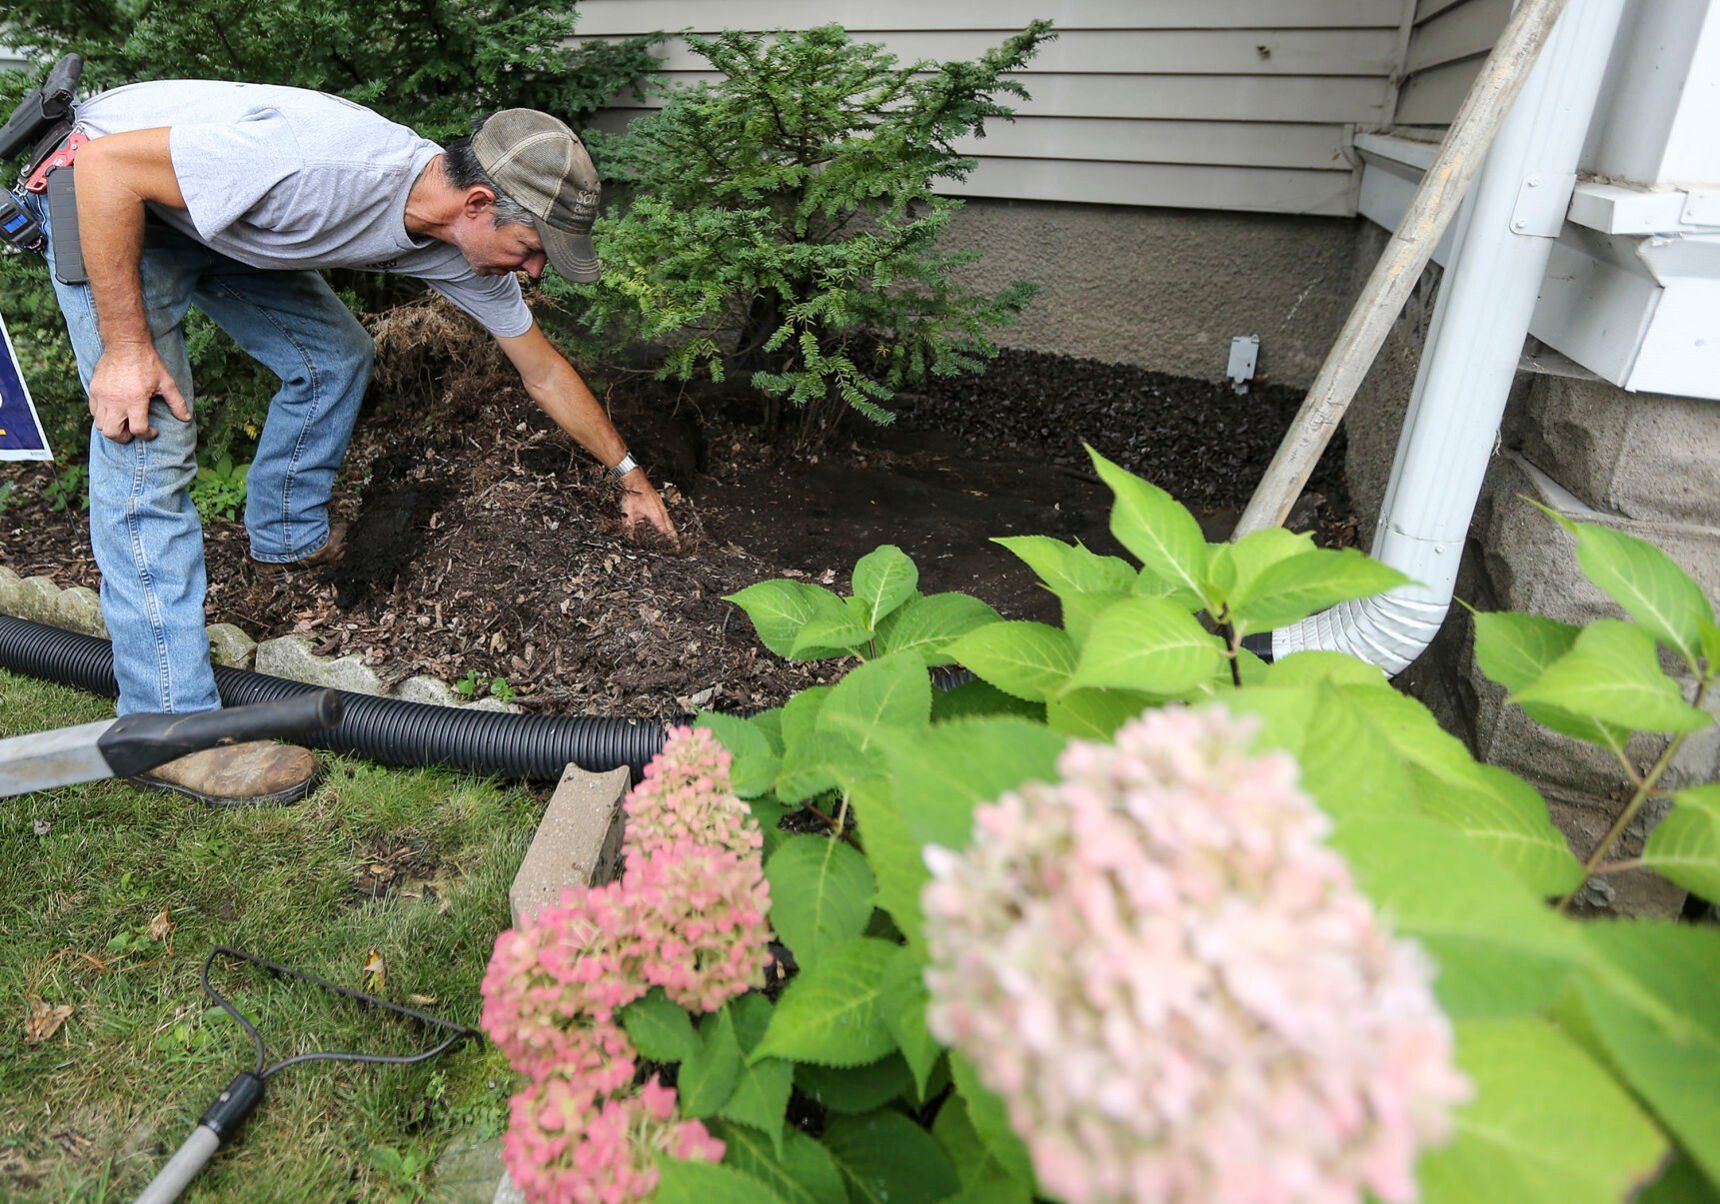 Chuck Schueller, of Epworth, Iowa, owner of Schueller Services LLC, installs mulch around a home in Dubuque on Thursday. Schueller has seen rising fuel costs eating into his profit margin.    PHOTO CREDIT: Dave Kettering